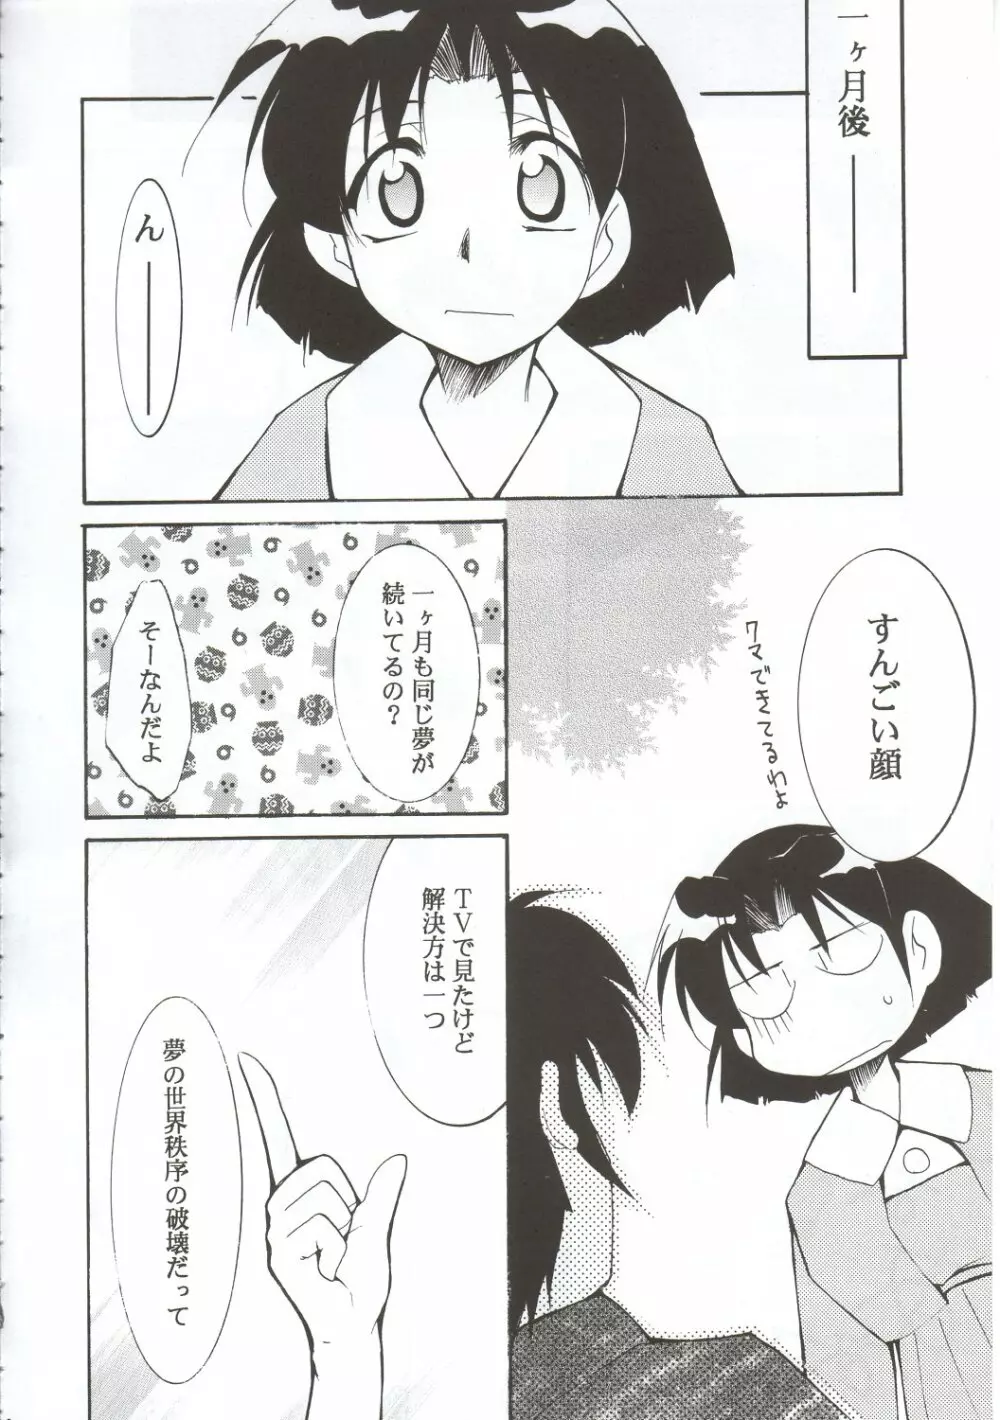 RANMA1/2 WORKS 3 Page.7